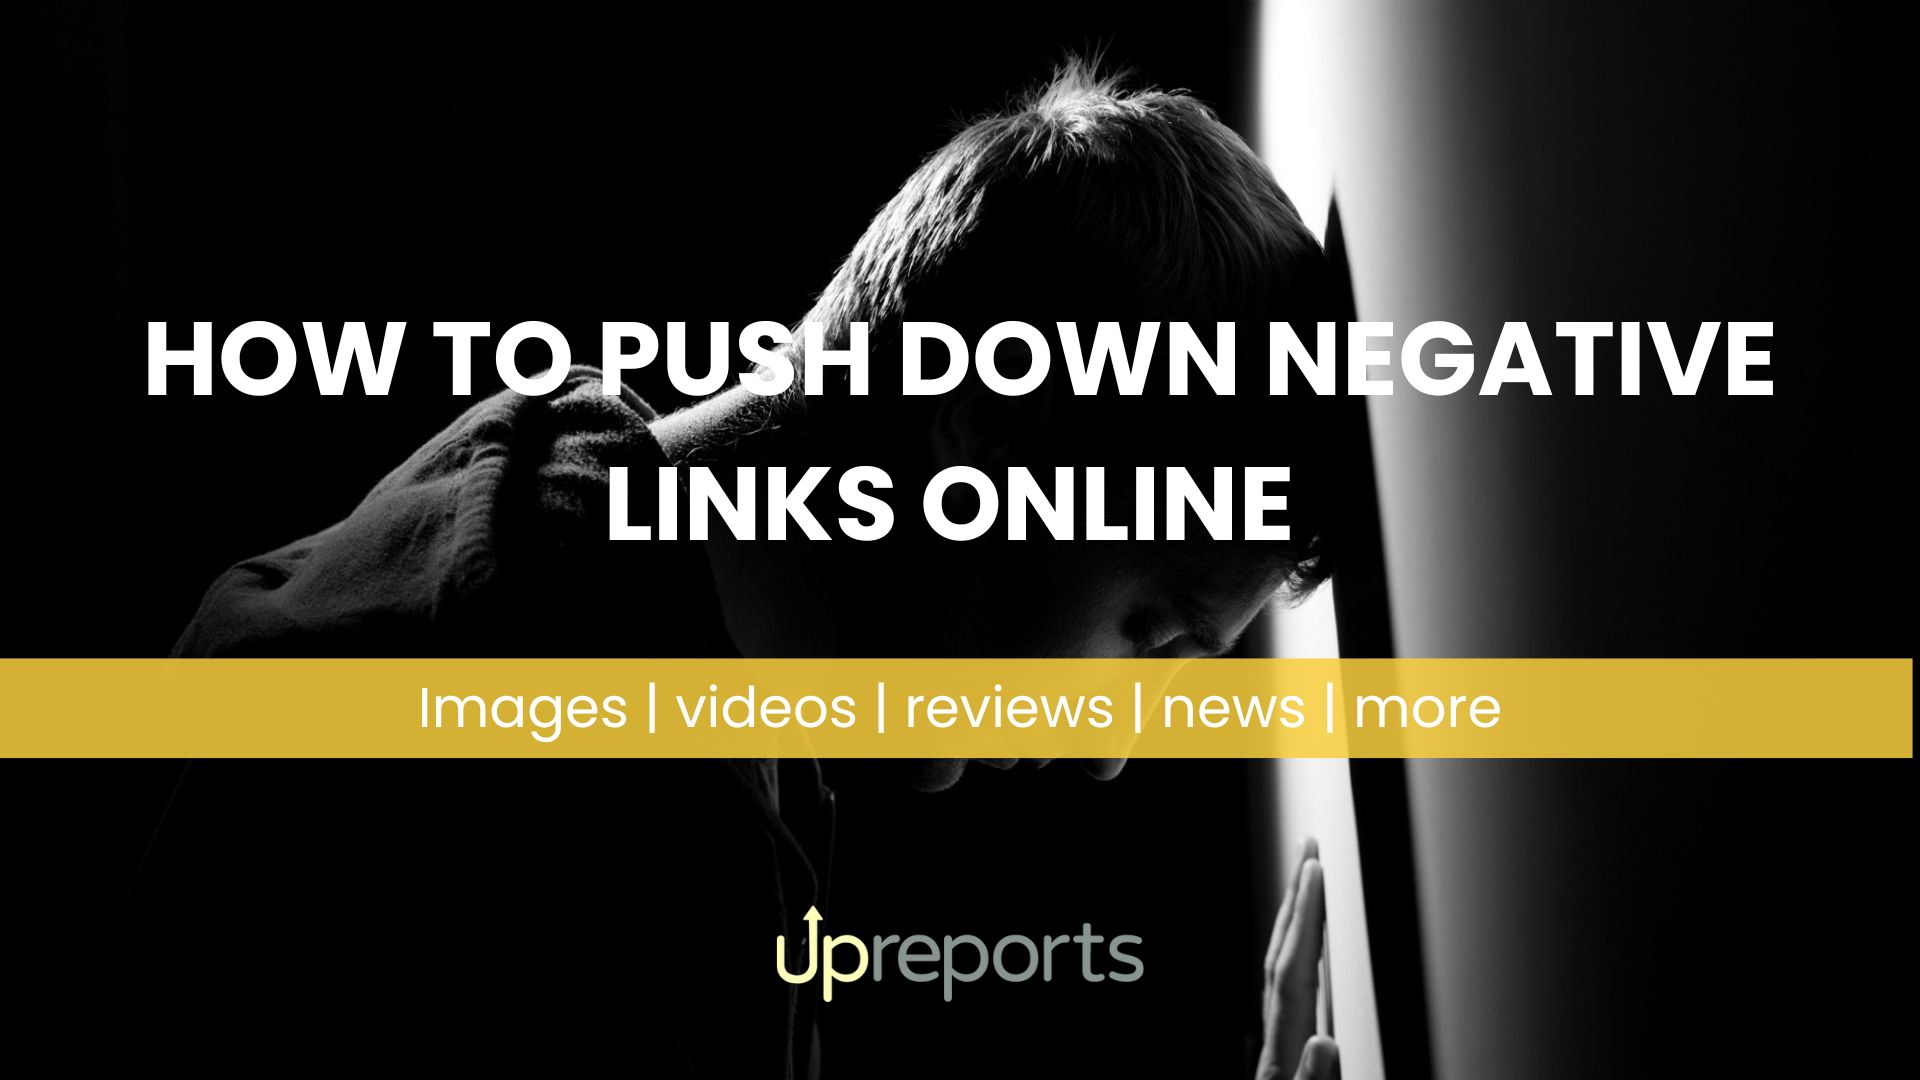 How to Push Down Negative Links Online: Suppress Images, videos & news